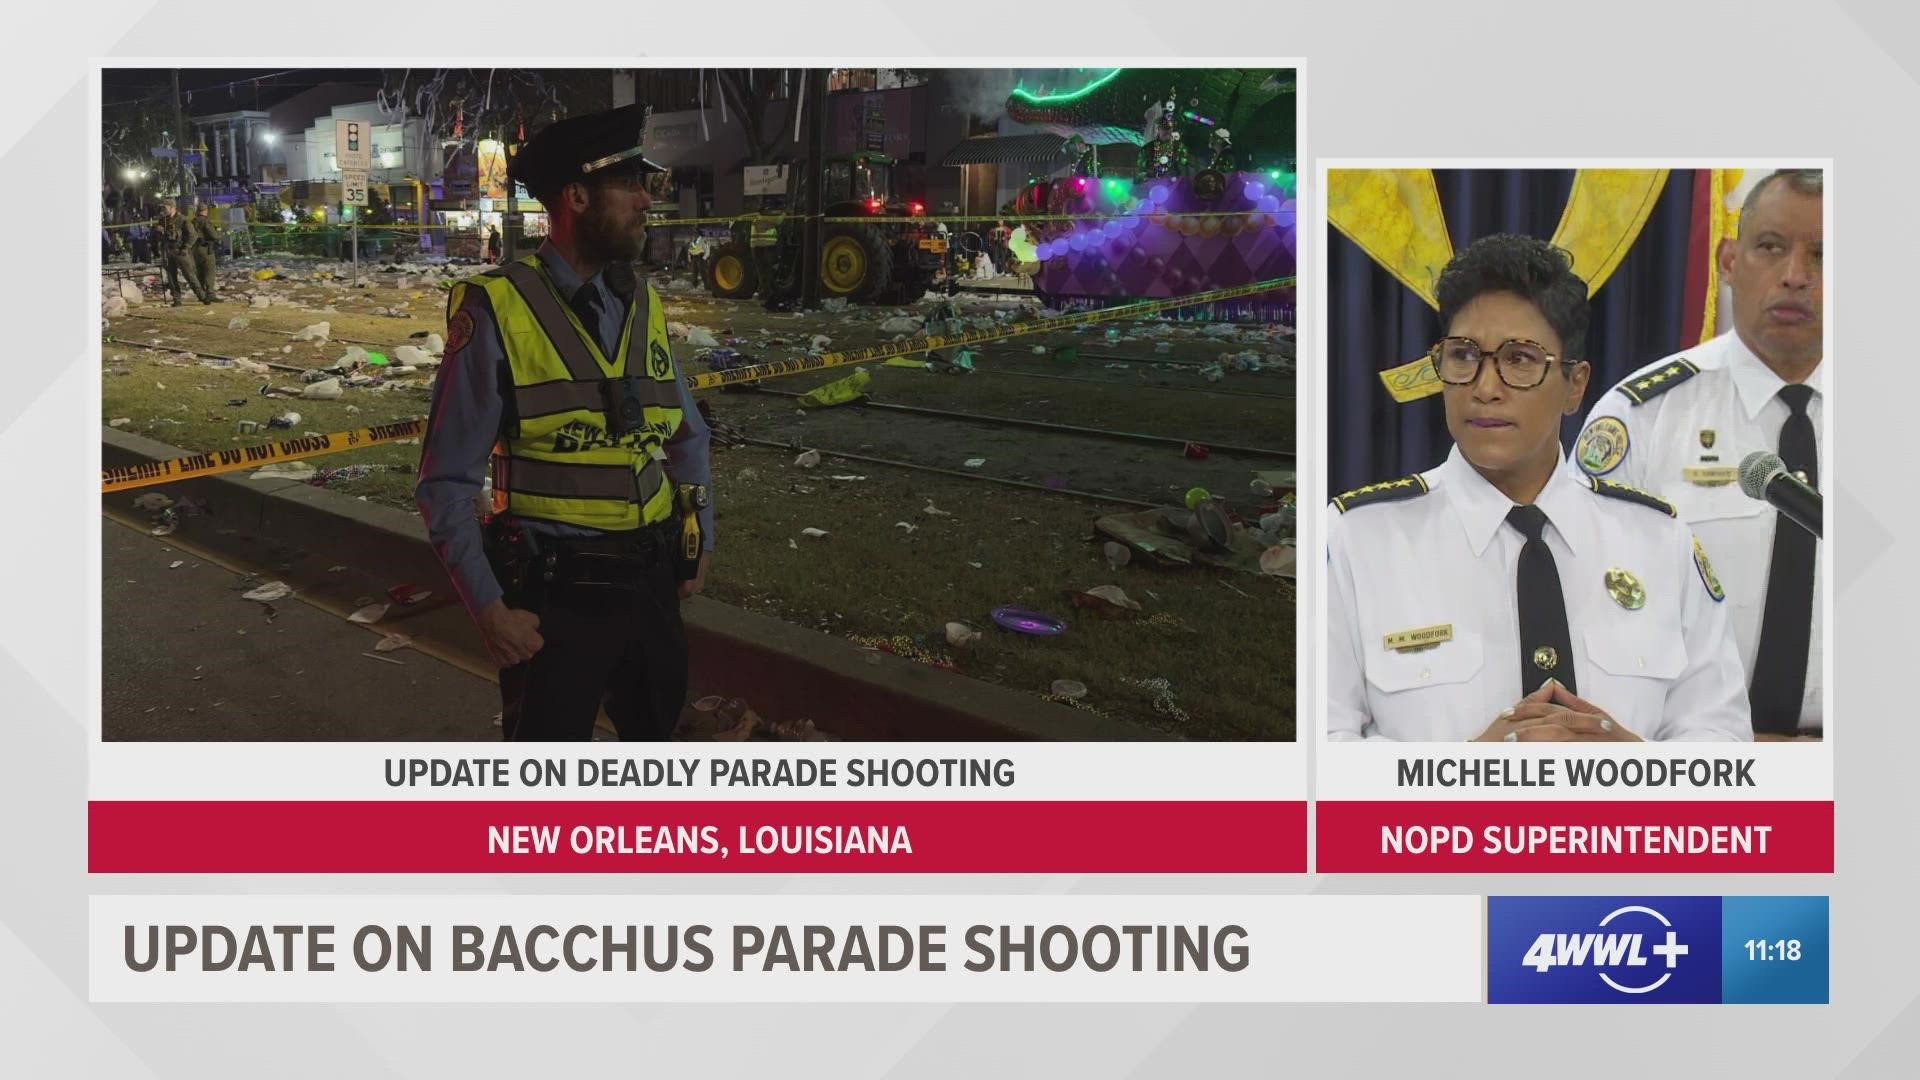 The Krewe of Bacchus parade was nearing the end of its journey when gunshots rang out on the New Orleans Mardi Gras parade route on Sunday.